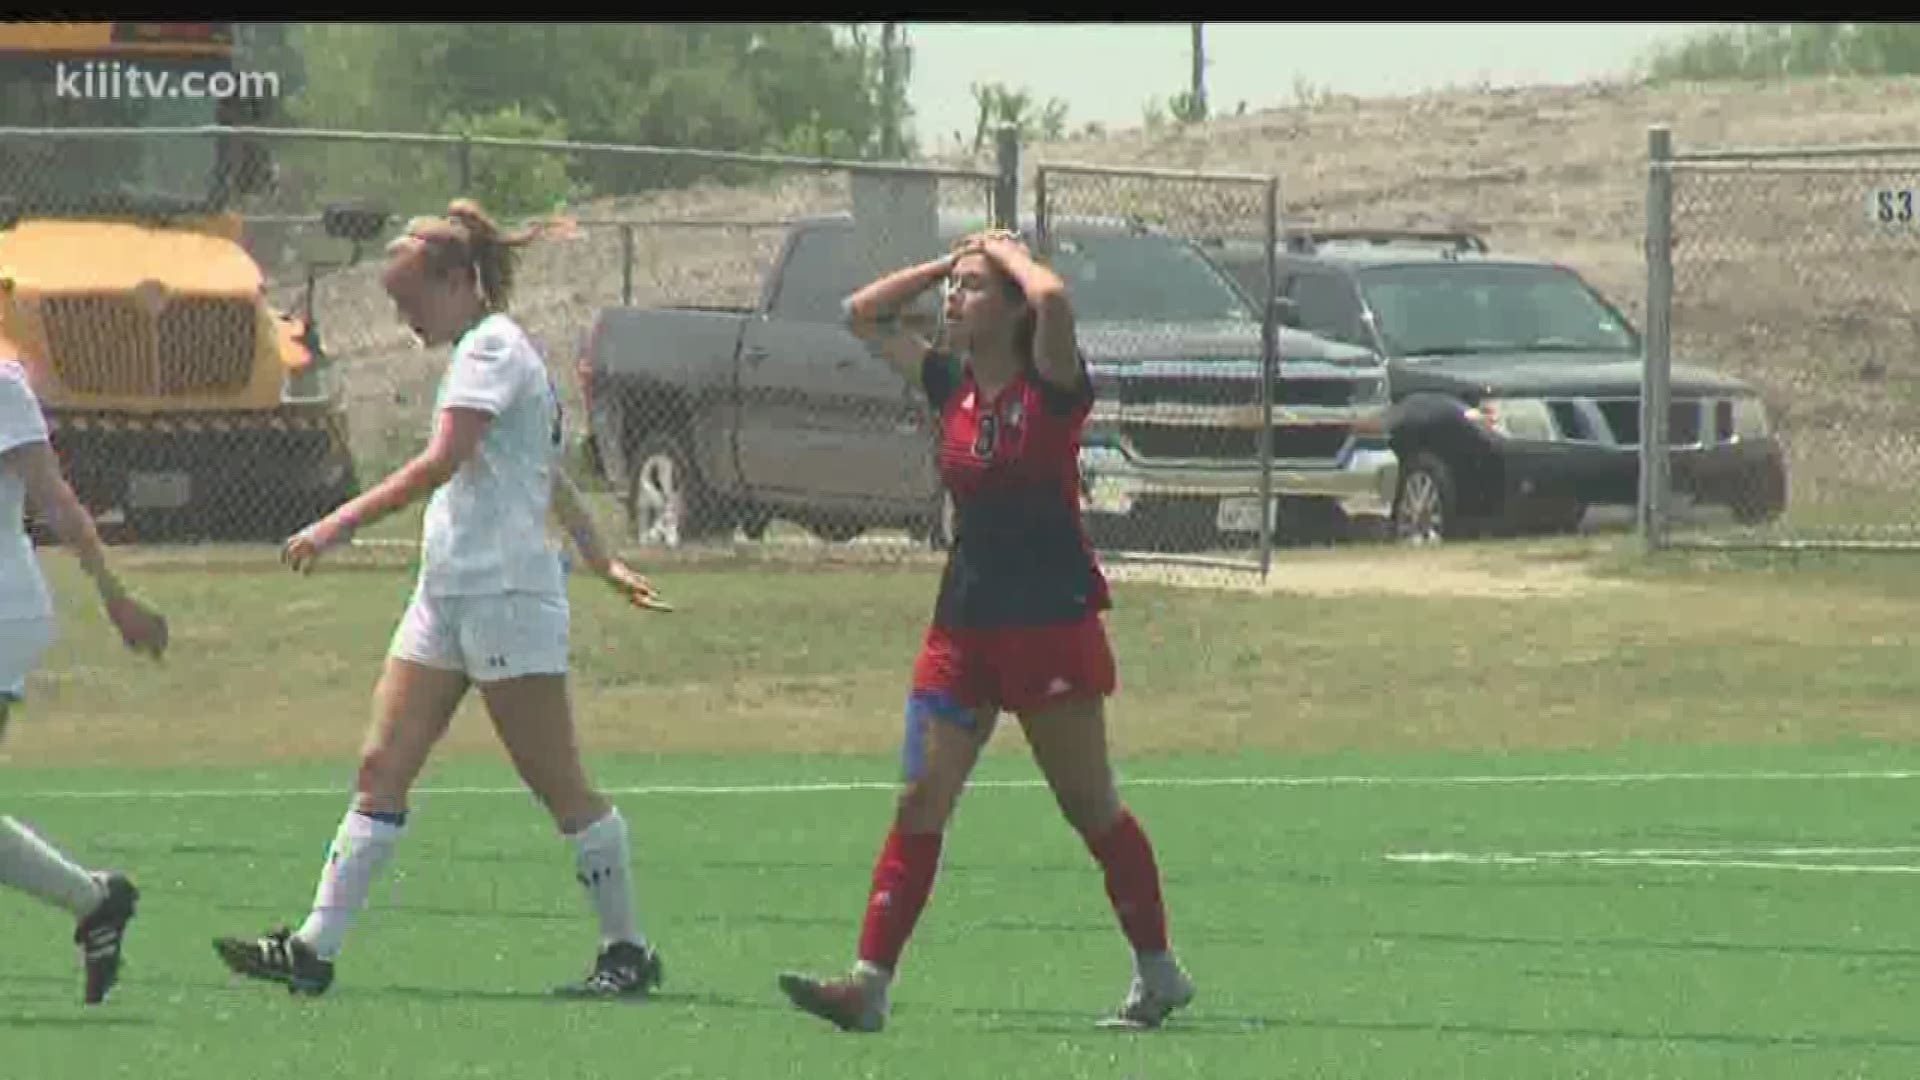 The Lady Eagles' late rally fell short in a 2-1 loss to Alamo Heights Friday afternoon at Cabaniss.